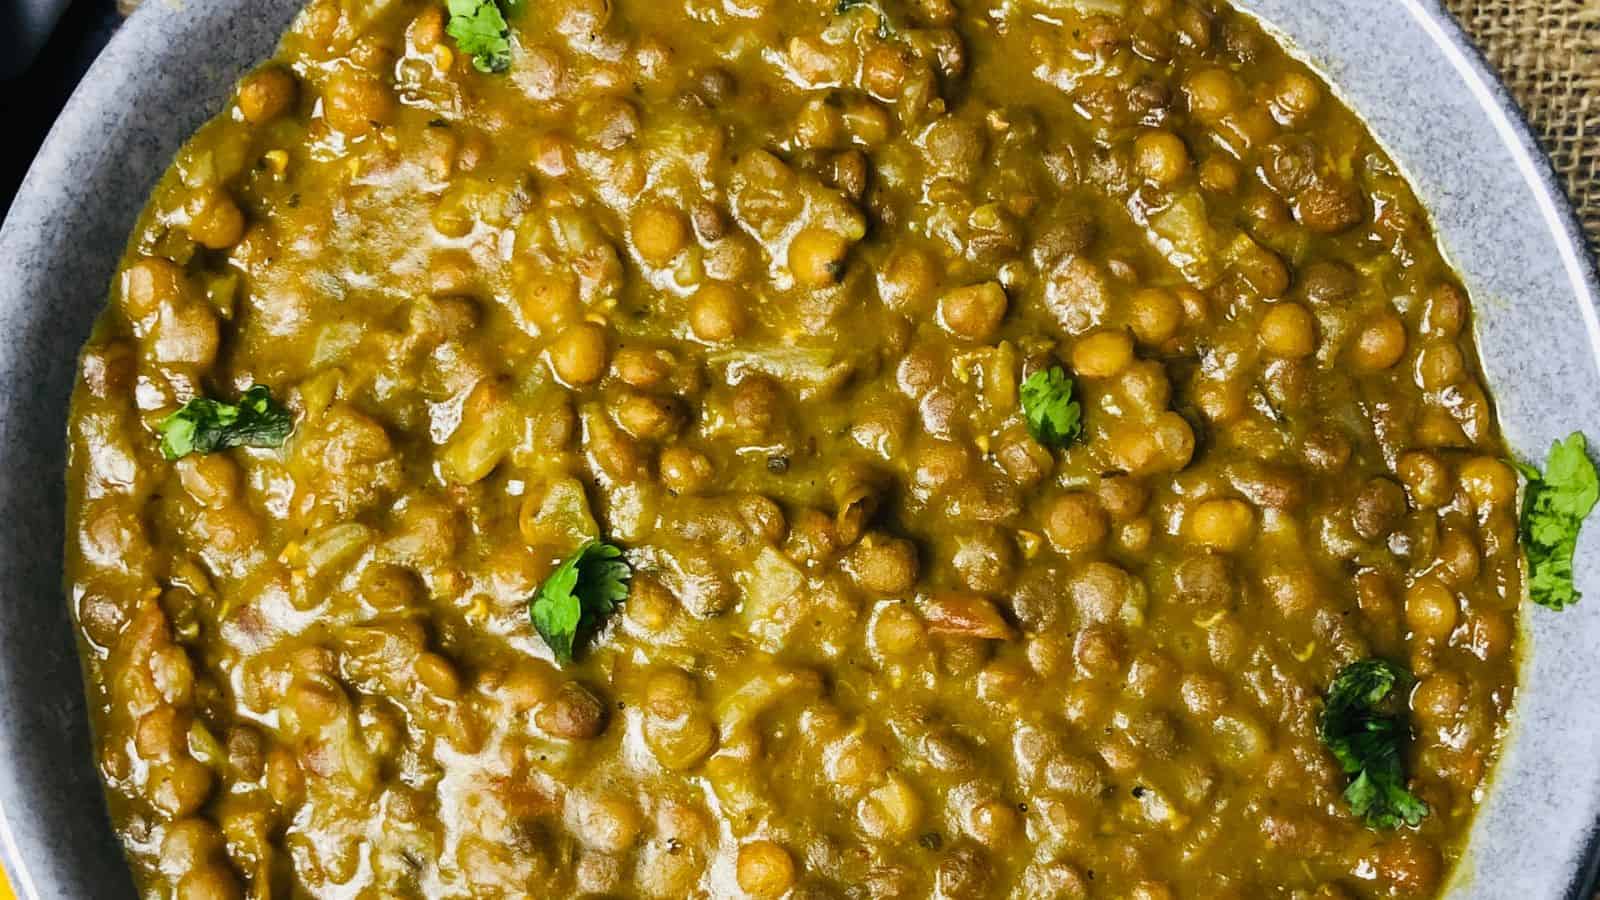 A bowl of Whole Masoor Dal garnished with fresh cilantro, consisting of cooked chickpeas in a spiced, saucy mixture.